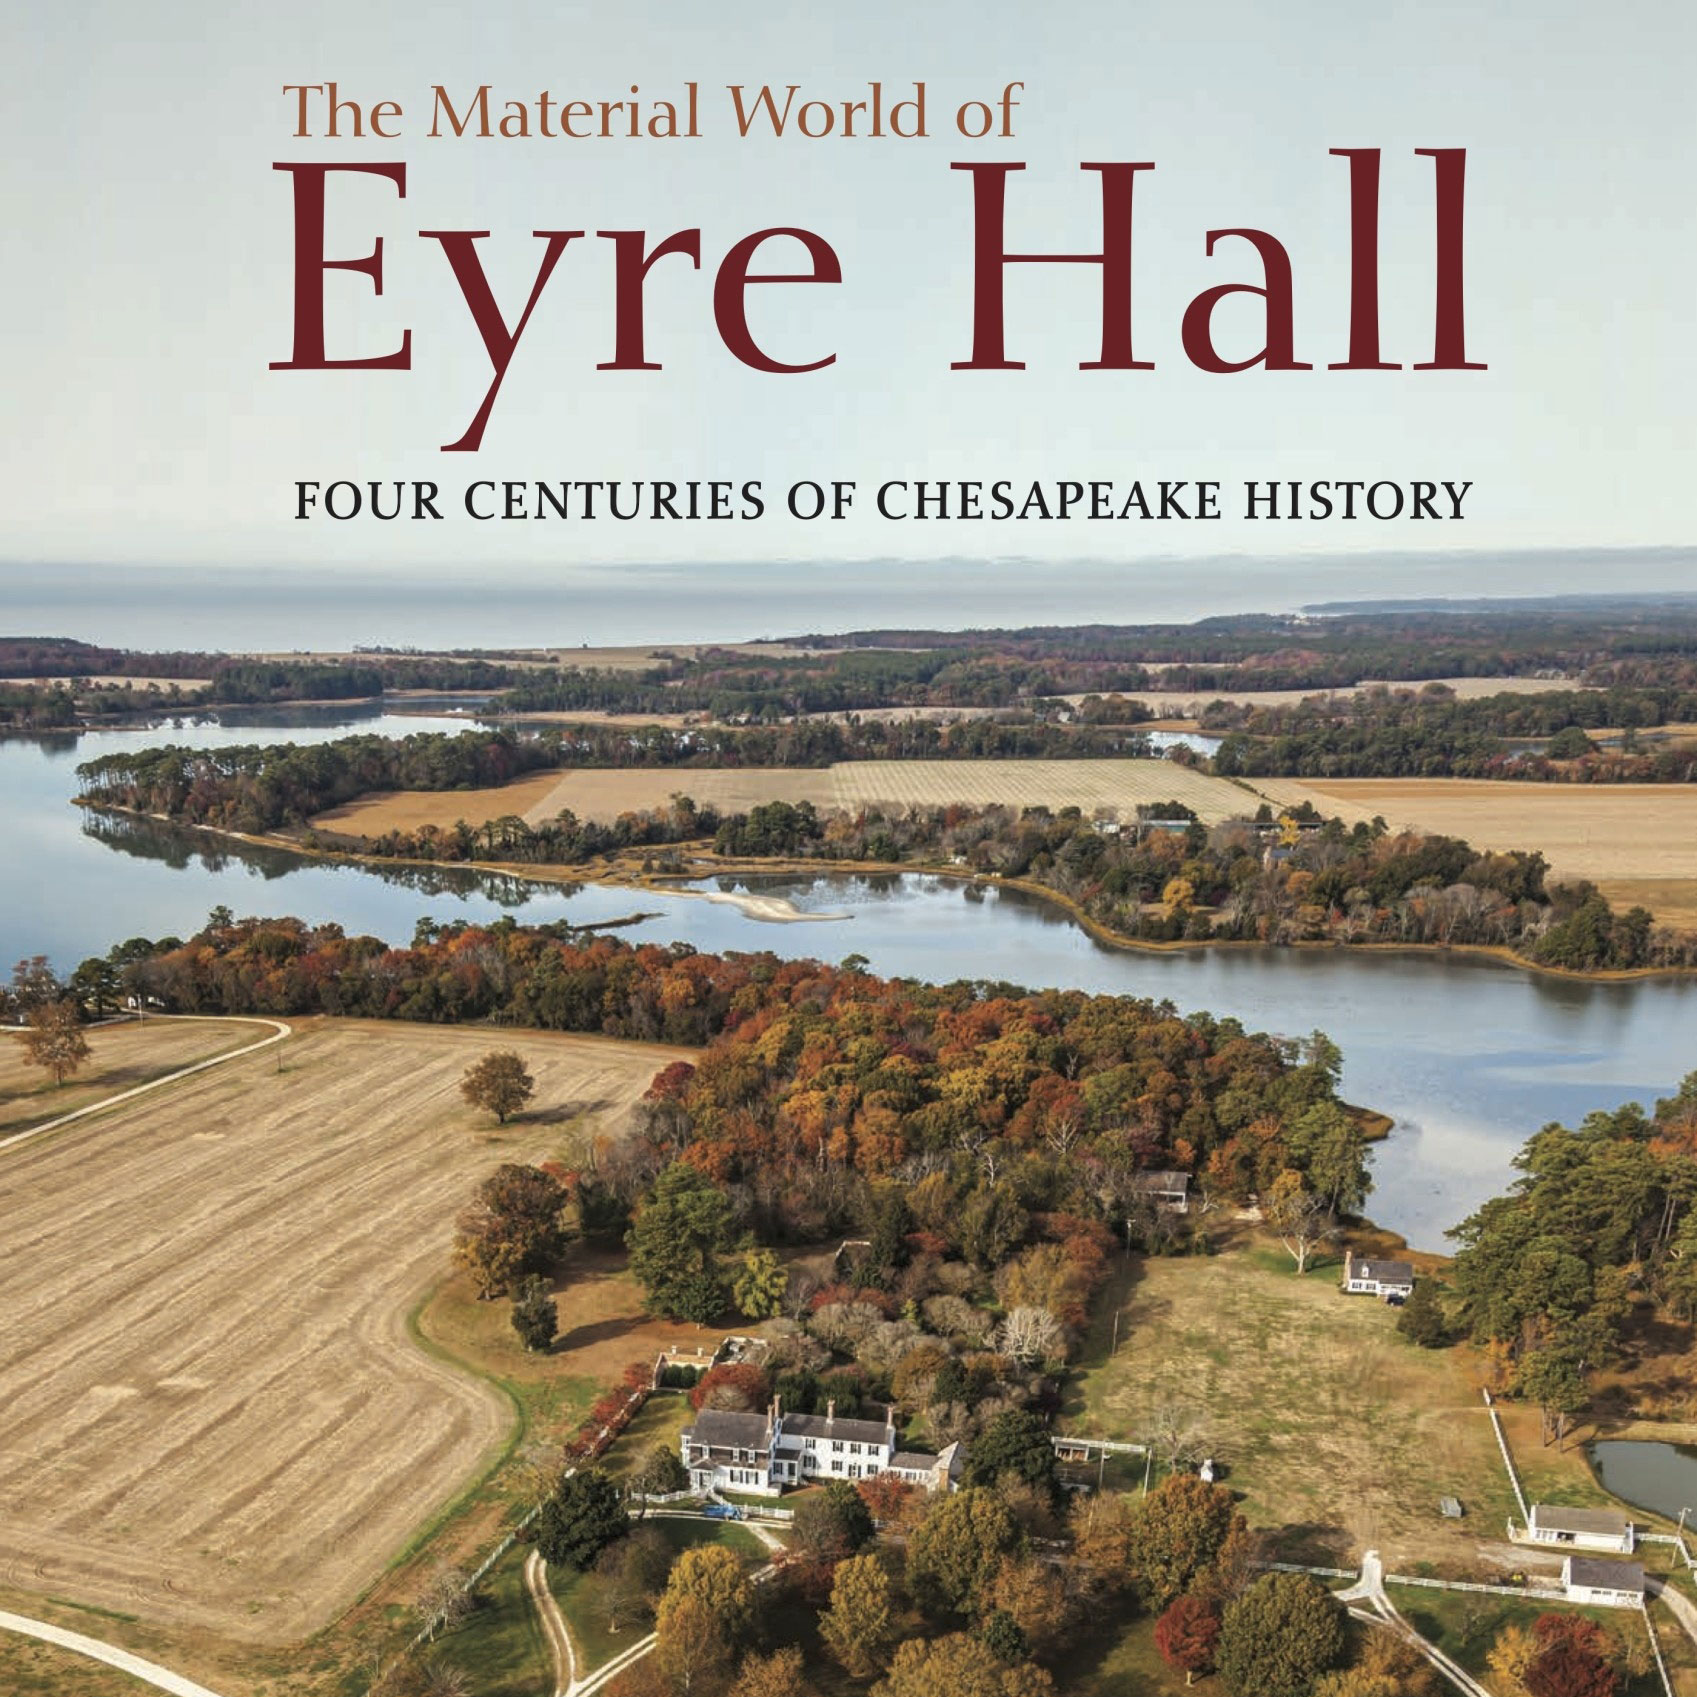 The Material World of Eyre Hall book cover from Maryland Center for History and Culture.